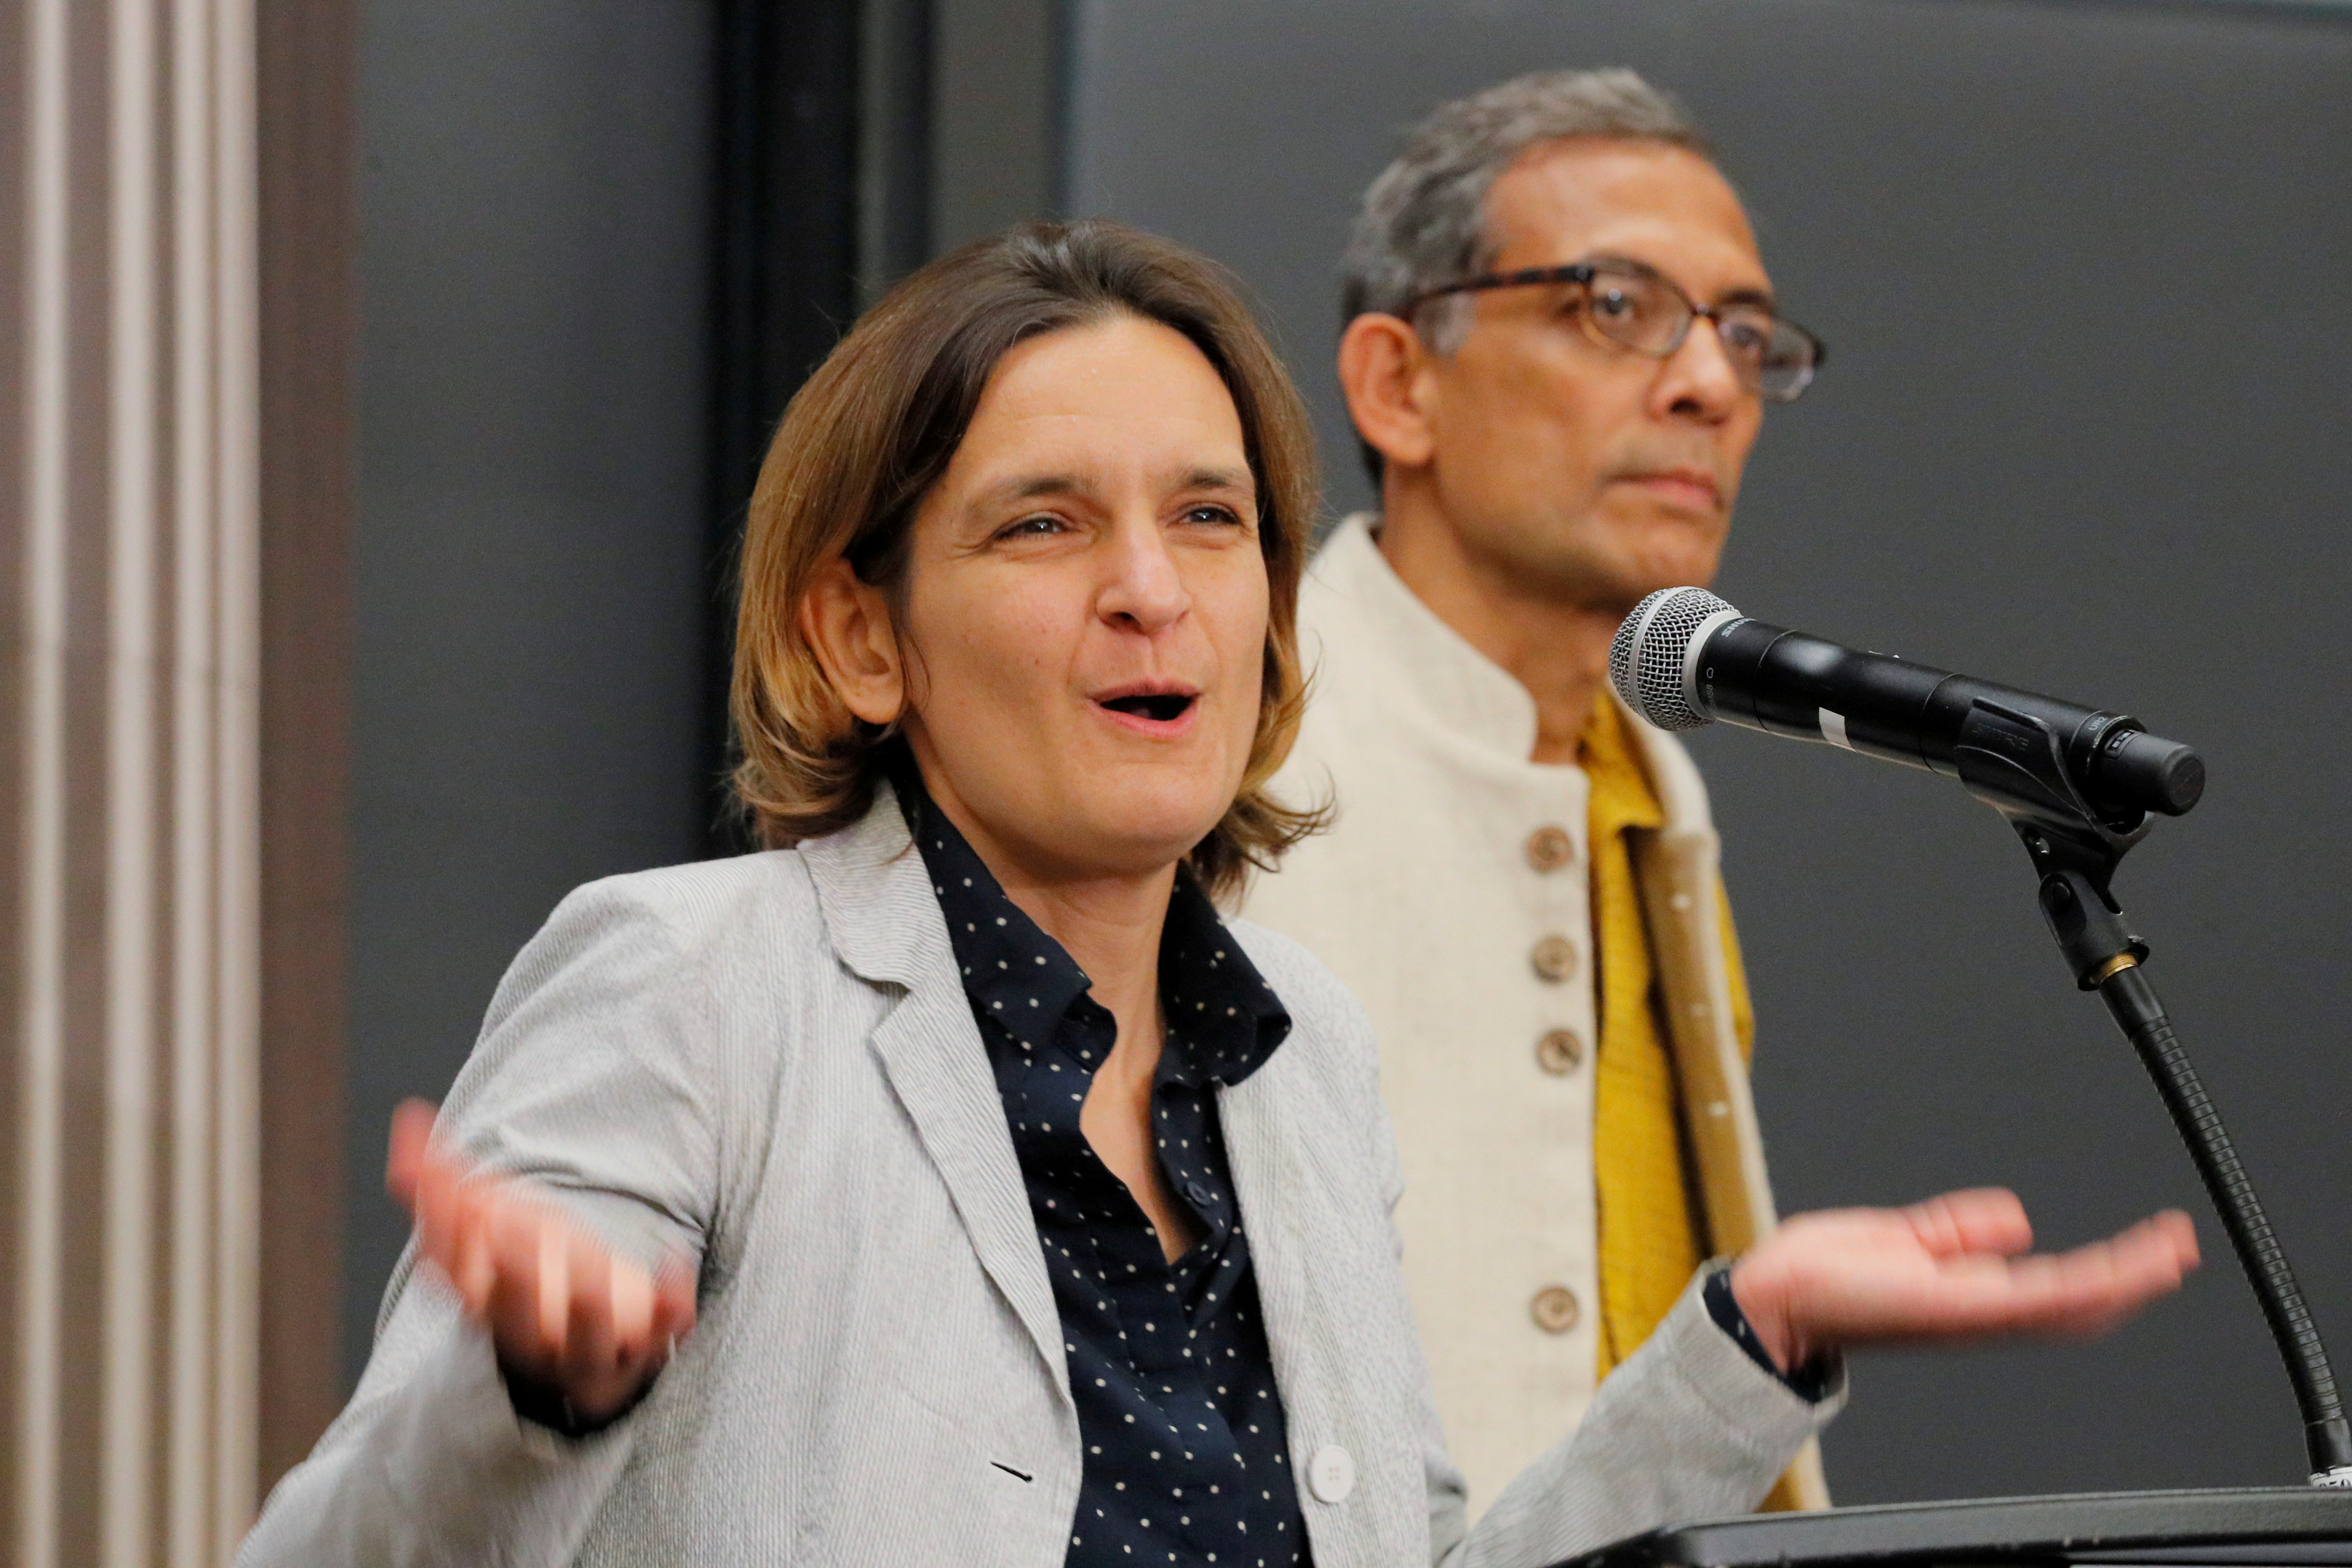 Abhijit Banerjee and Esther Duflo, two of the three winners of the 2019 Nobel Prize in Economics, speak at news conference at the Massachusetts Institute of Technology (MIT) in Cambridge, Massachusetts, U.S., October 14, 2019.     REUTERS/Brian Snyder/File Photo